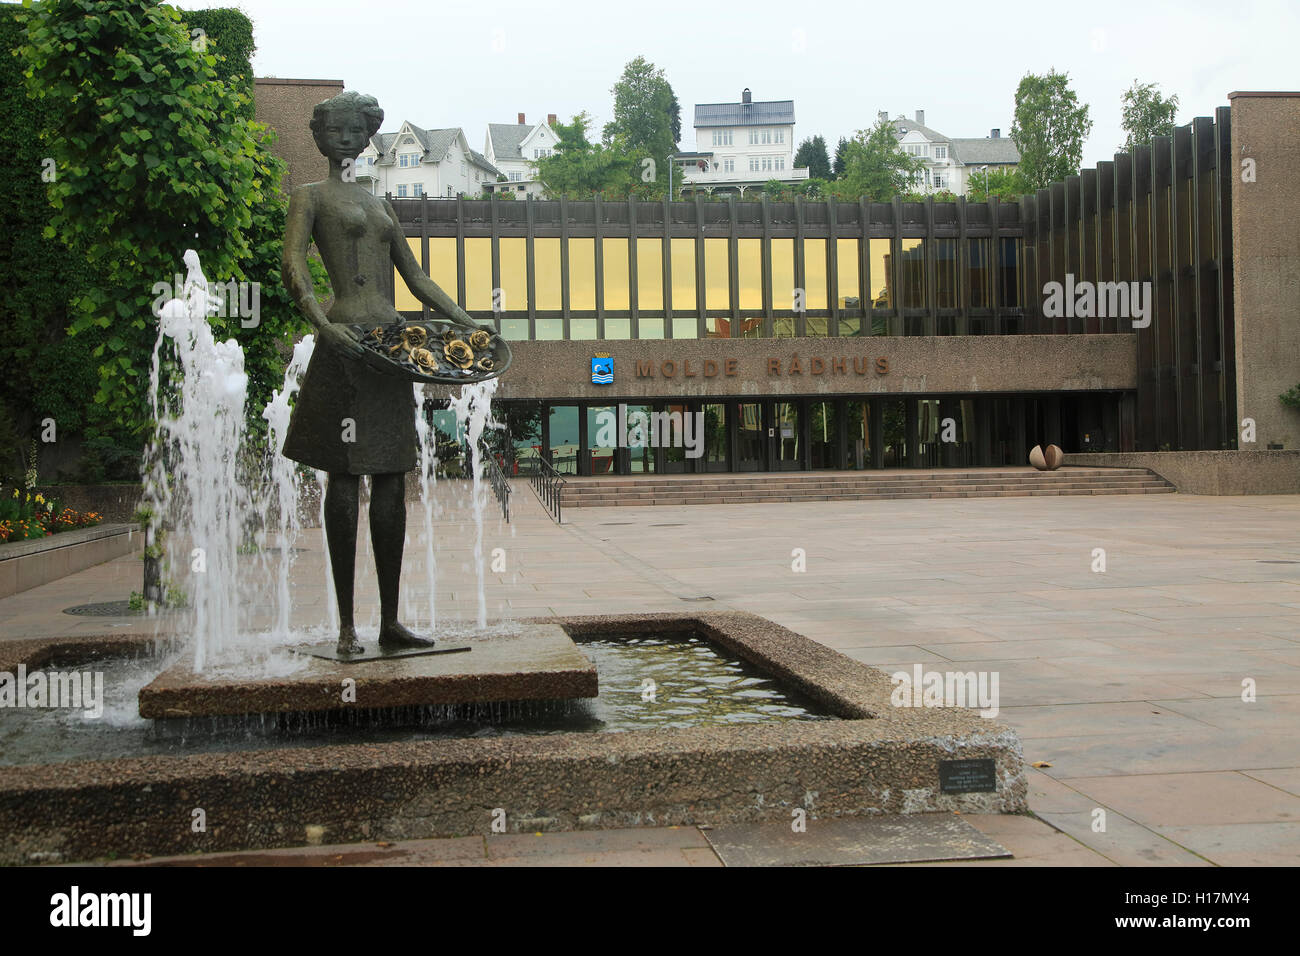 Town hall 'Radhus' building in town centre of Molde, Romsdal county, Norway with water fountain sculpture Stock Photo